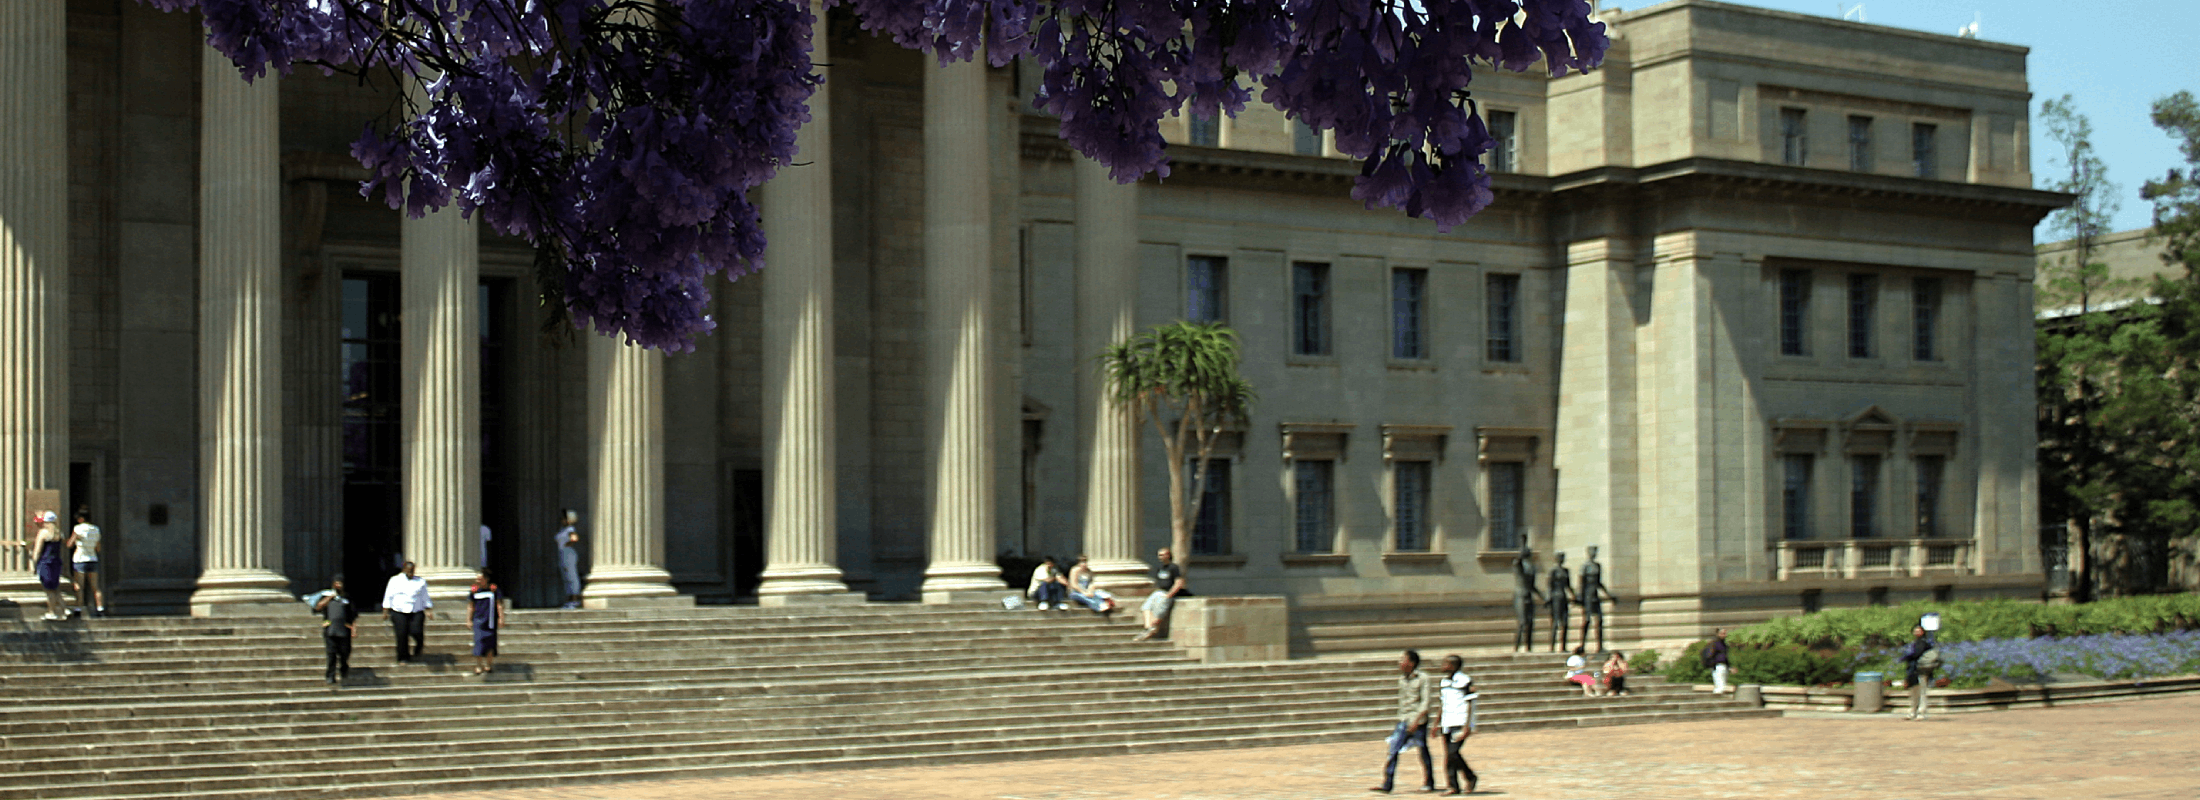 Great Hall Wits University